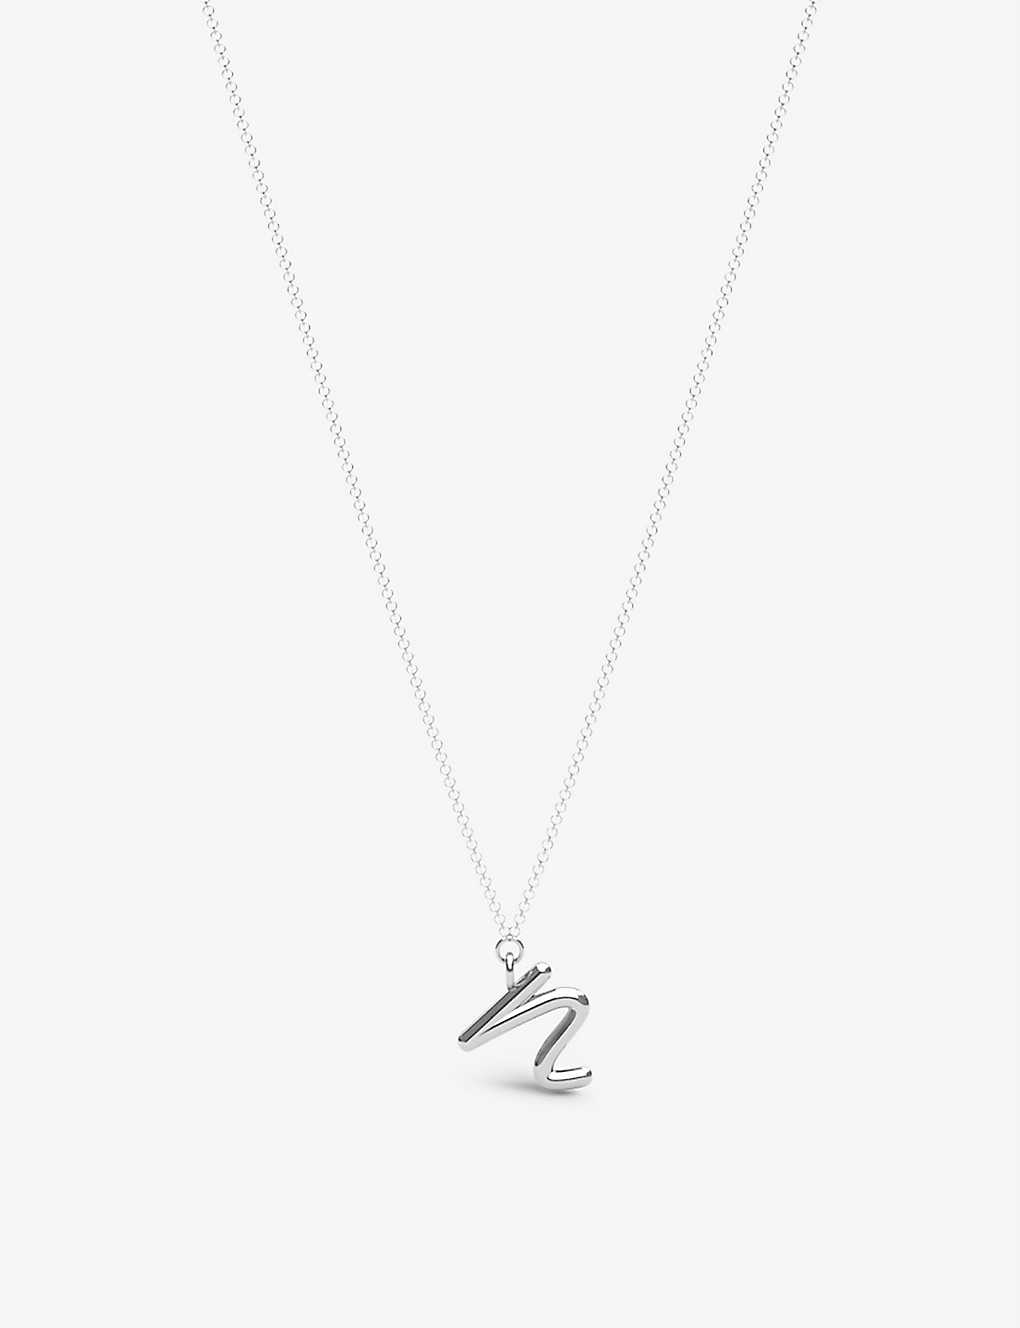 The Alkemistry Womens 18ct White Gold Love Letter N Initial 18ct White-gold Pendant Necklace